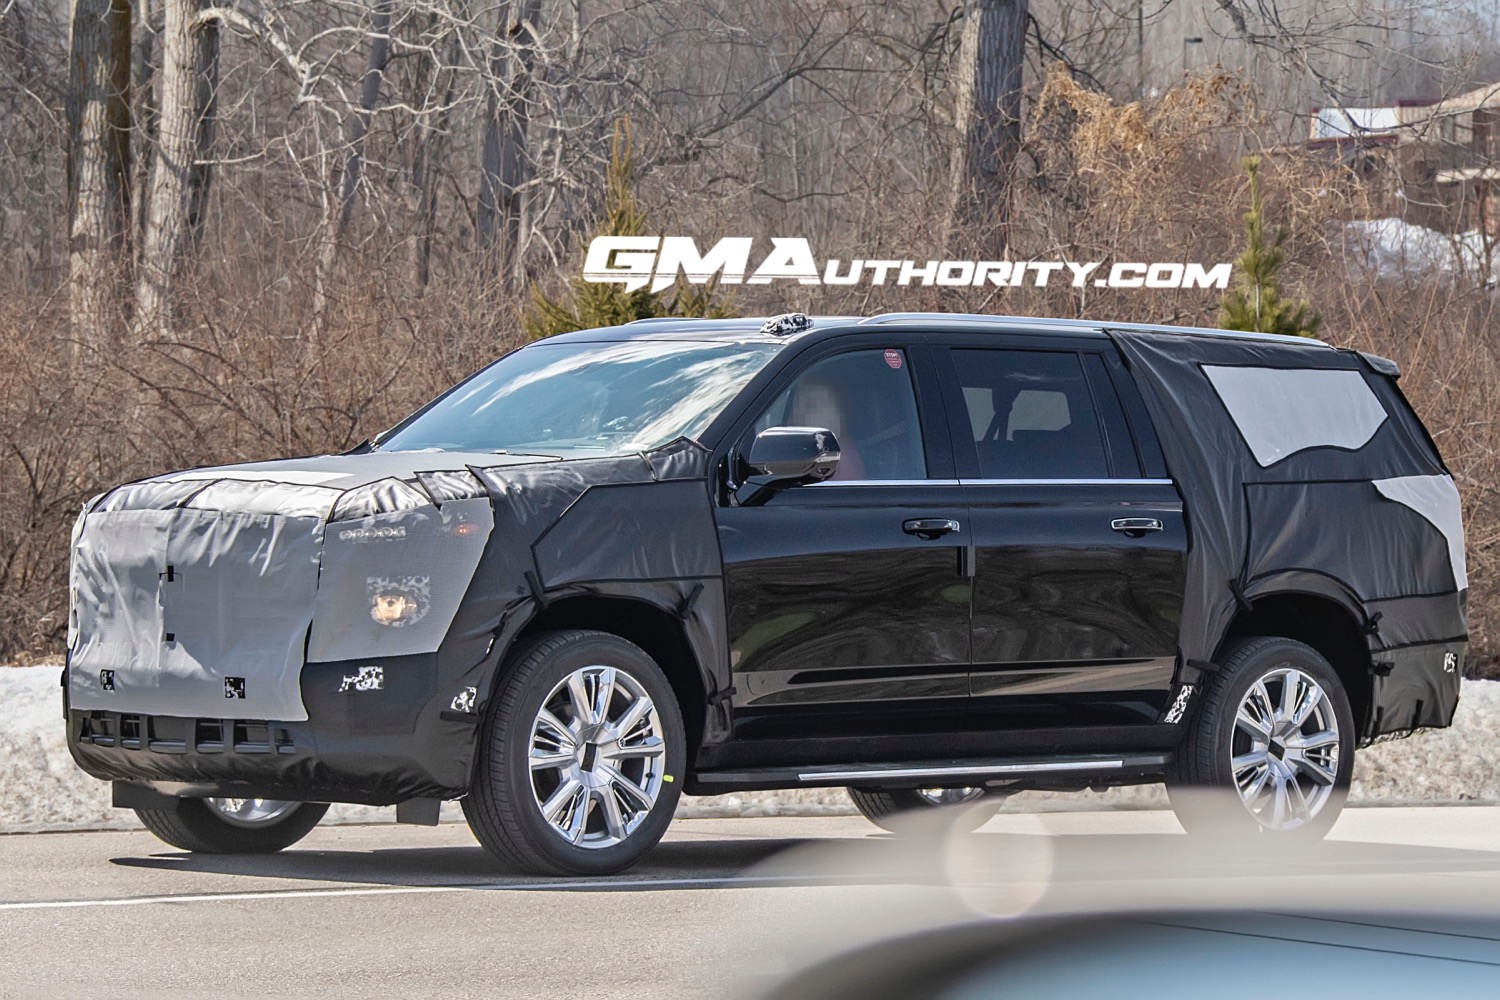 Refreshed 2024 Chevy Tahoe, Suburban Interior Show Updates